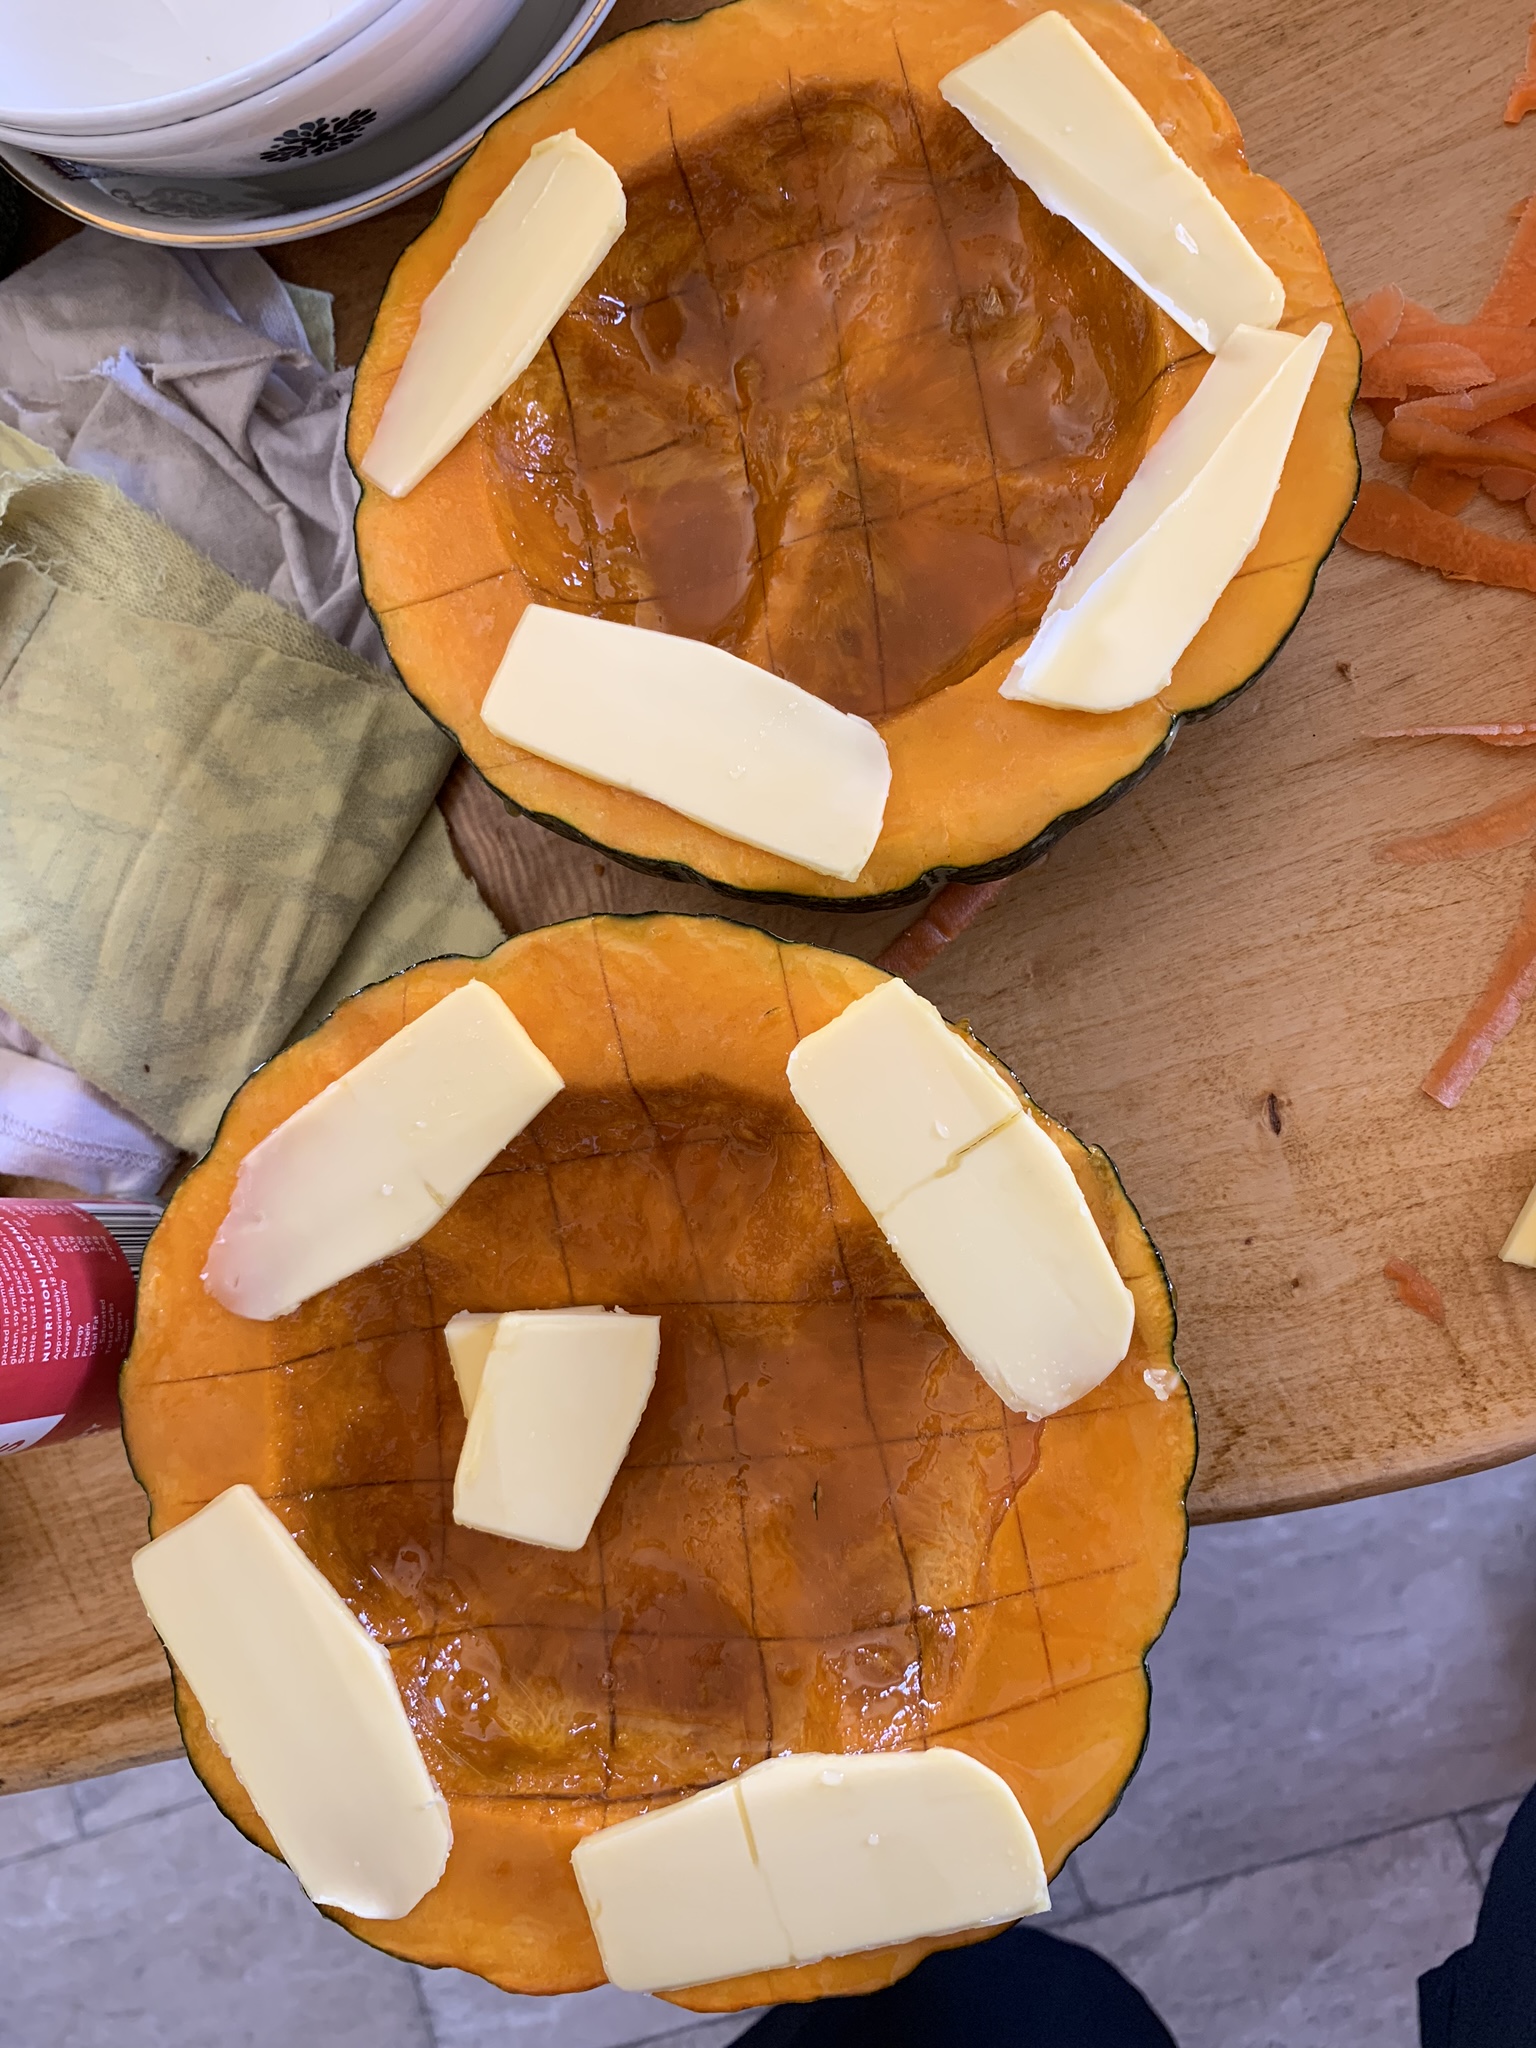 Pre-cooking pumpkin.  Cut in half like a couple bowls, honey rubbed all over, and butter slices arranged around the rim and inside.